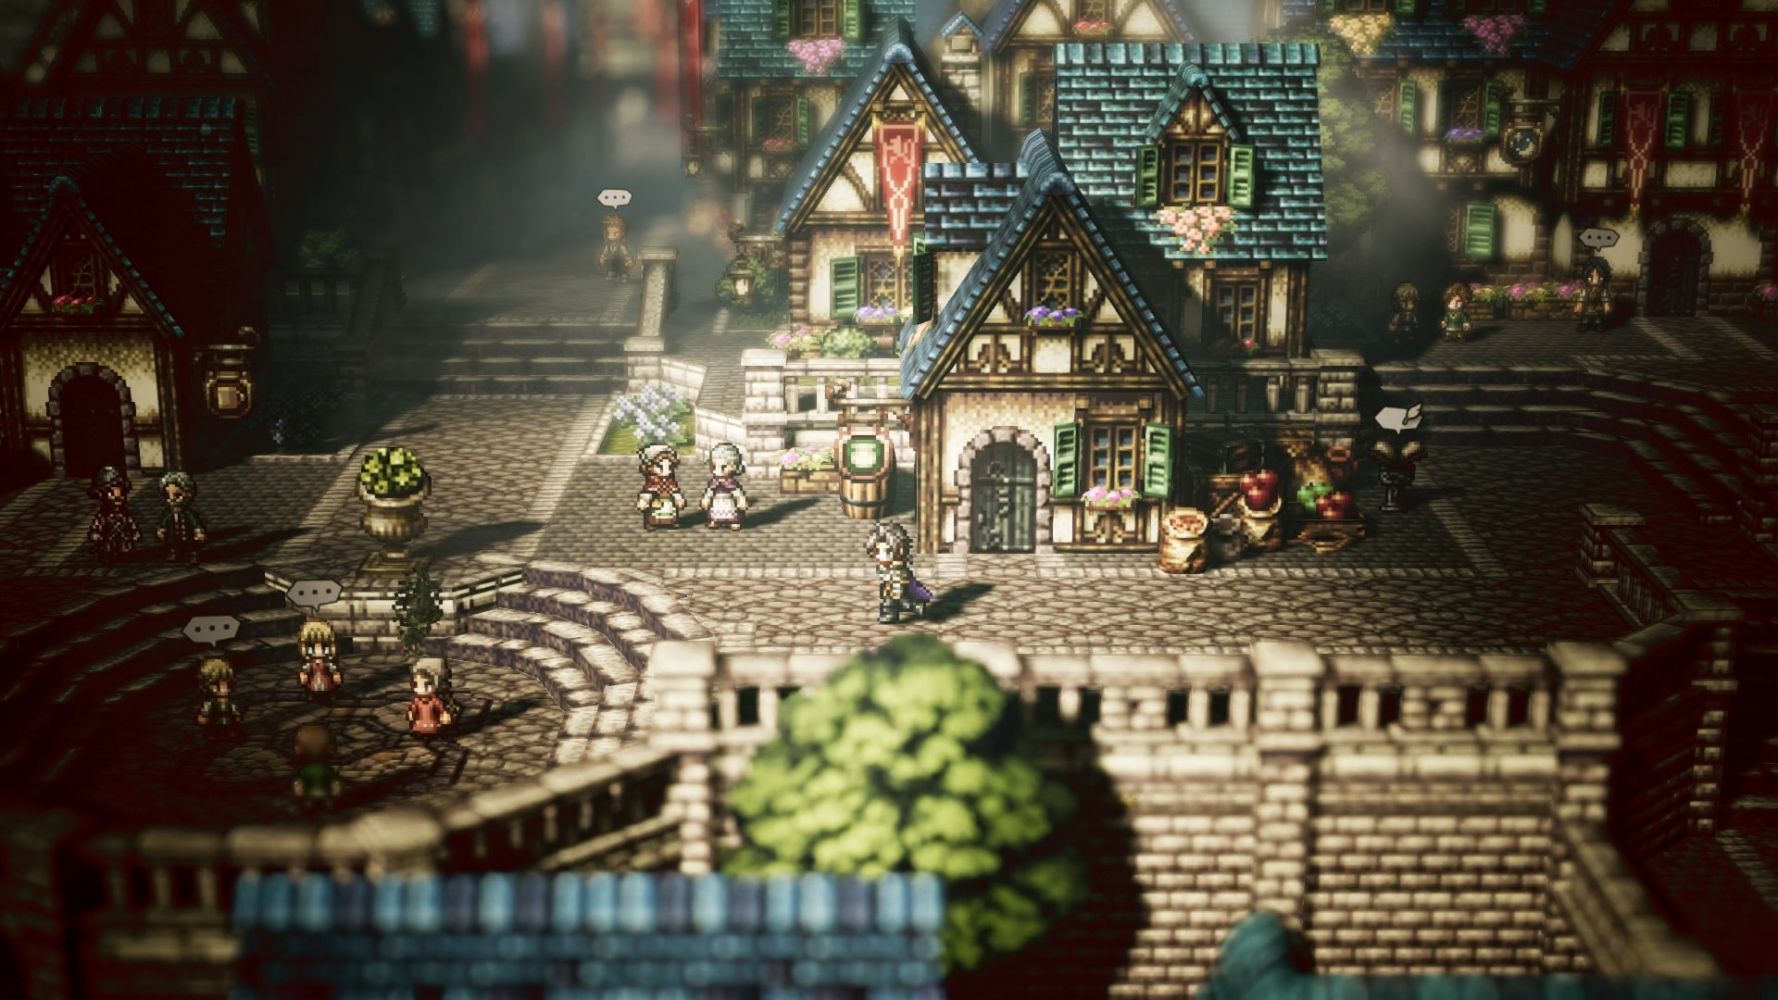 octopath traveler 2 ps5 download